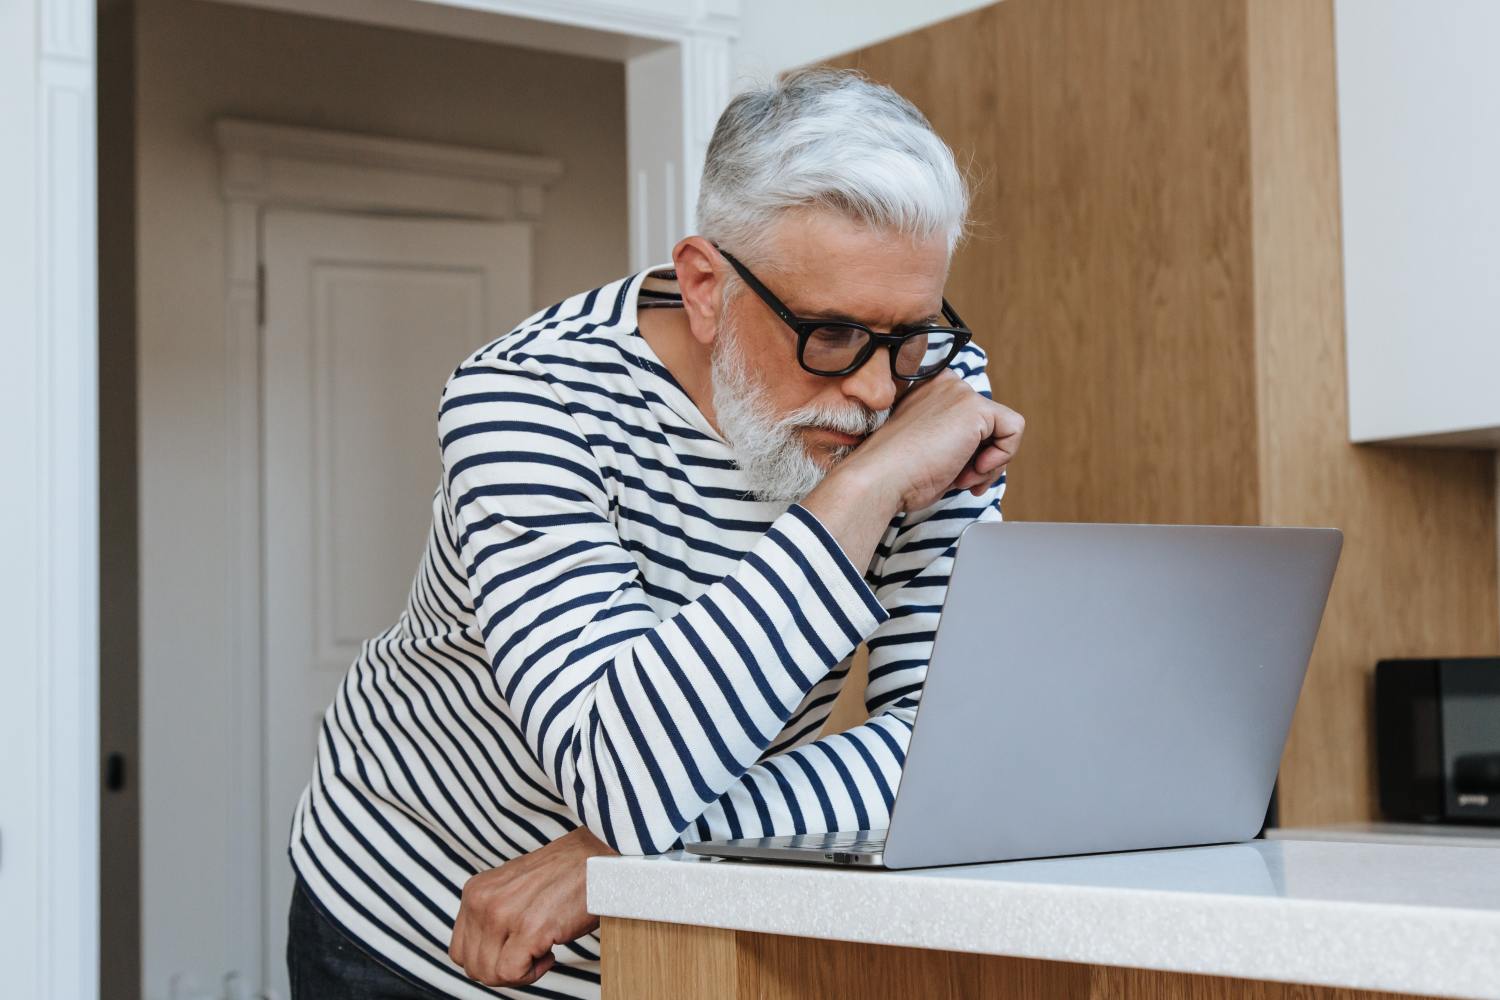 Man on laptop researching reverse mortgage after death and estate planning.